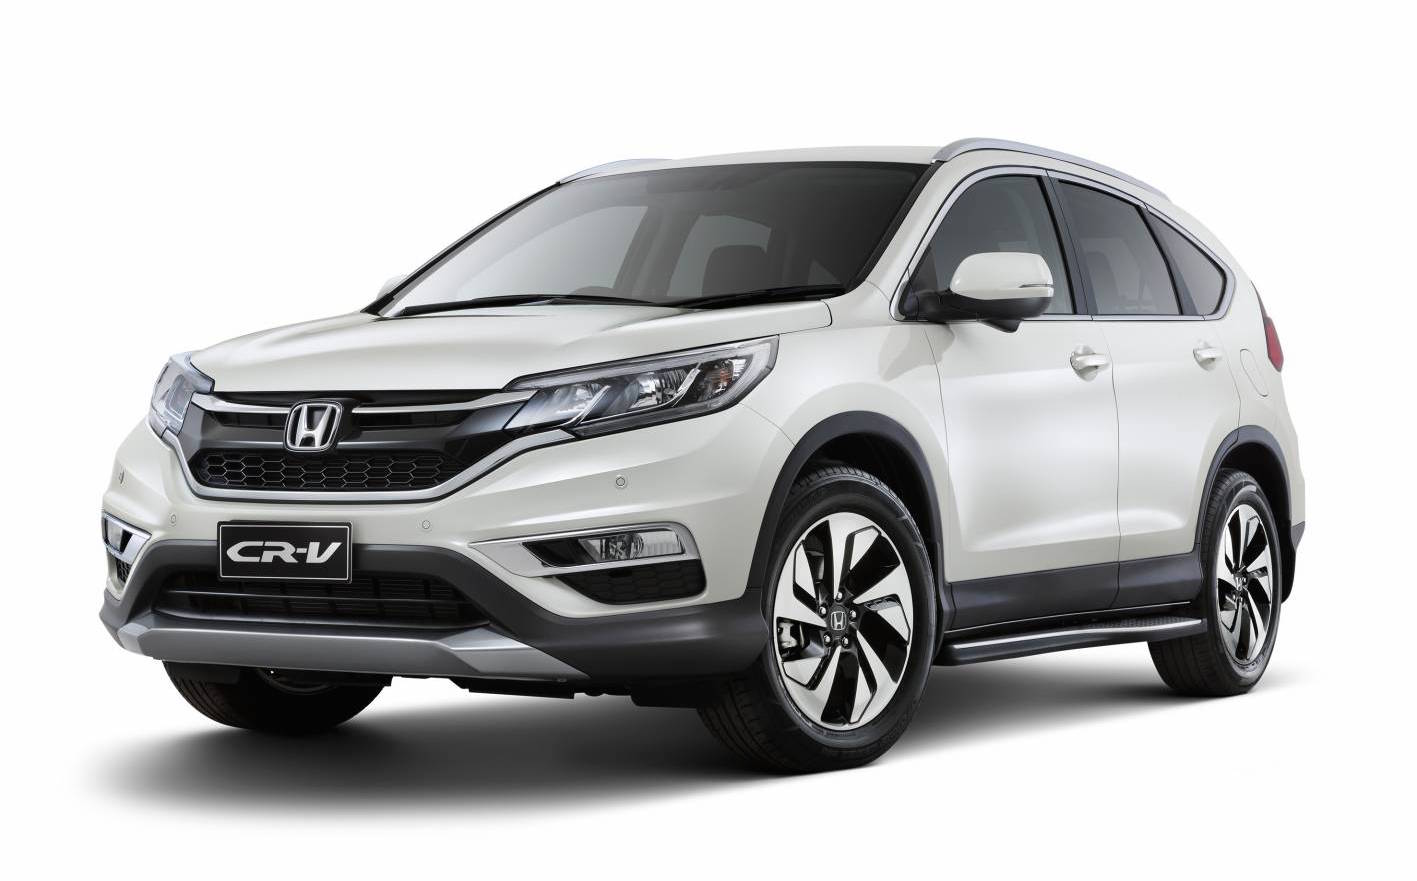 2015 Honda CR-V 4WD Limited Edition on sale from $35,690